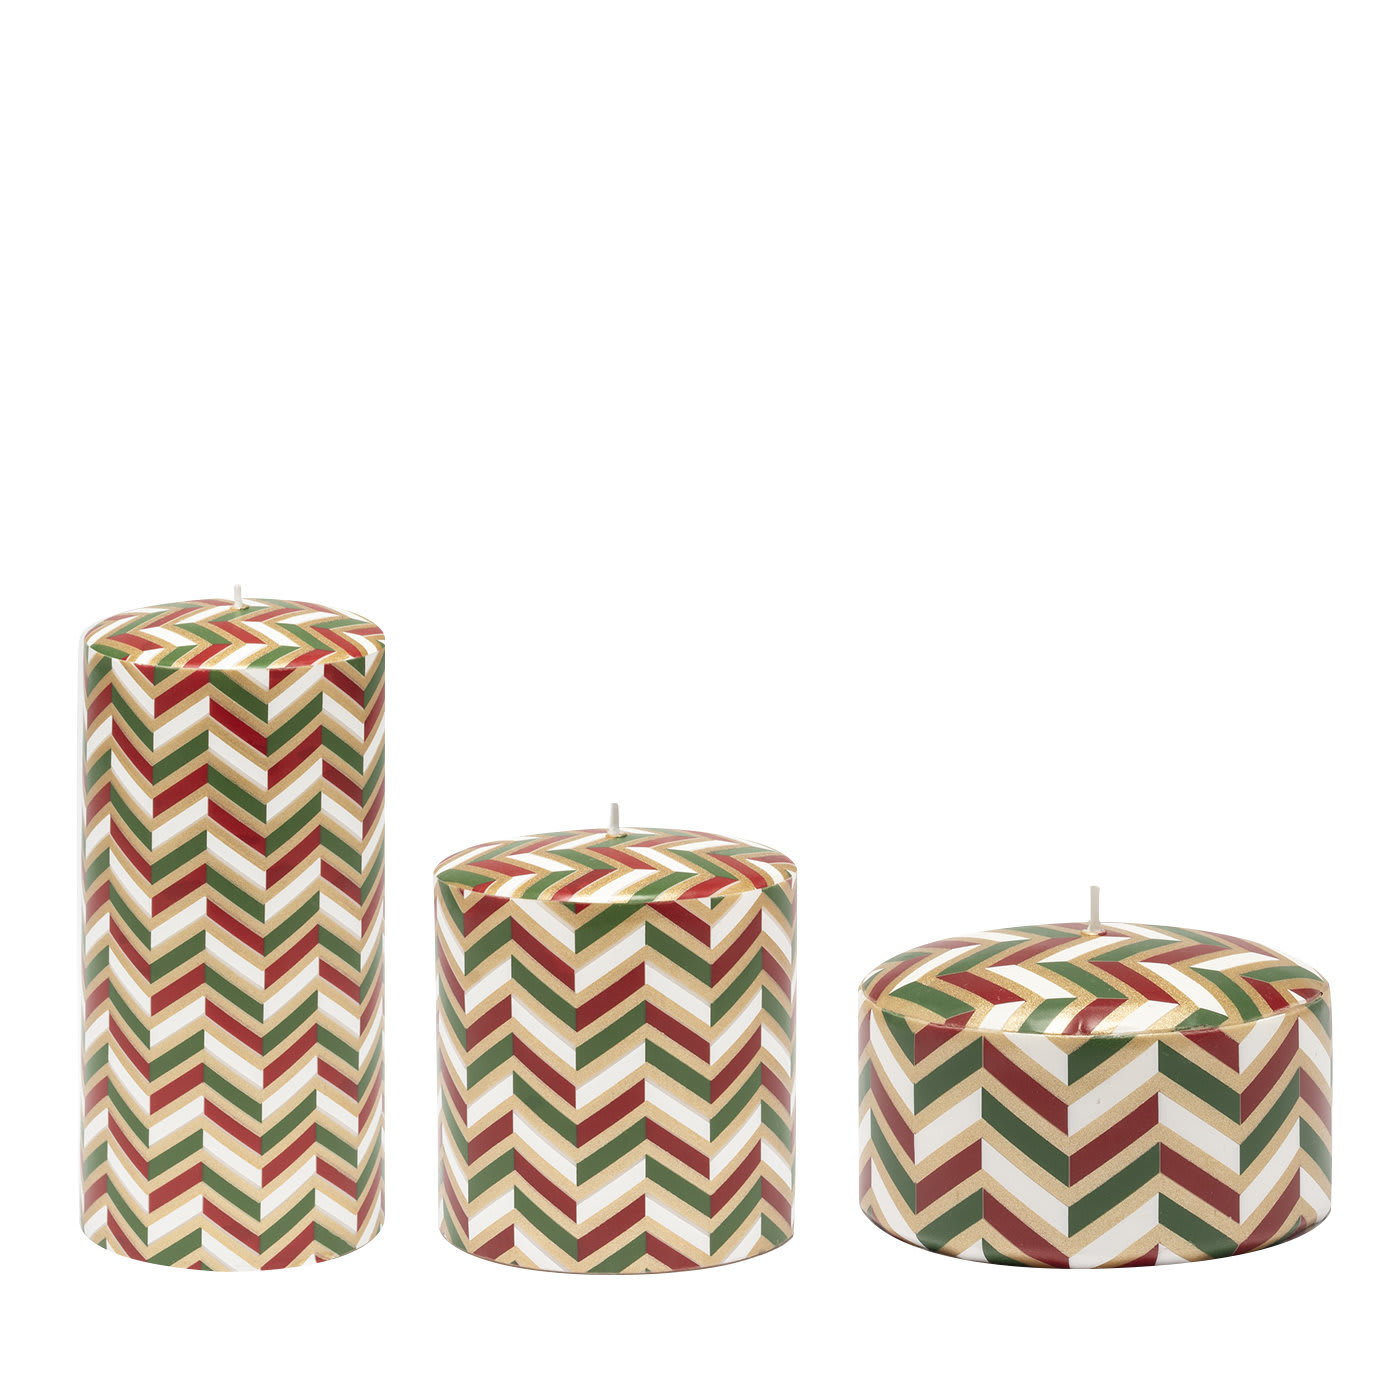 Righe Set of 3 Red and Green Candles - Cereria Pernici 1892